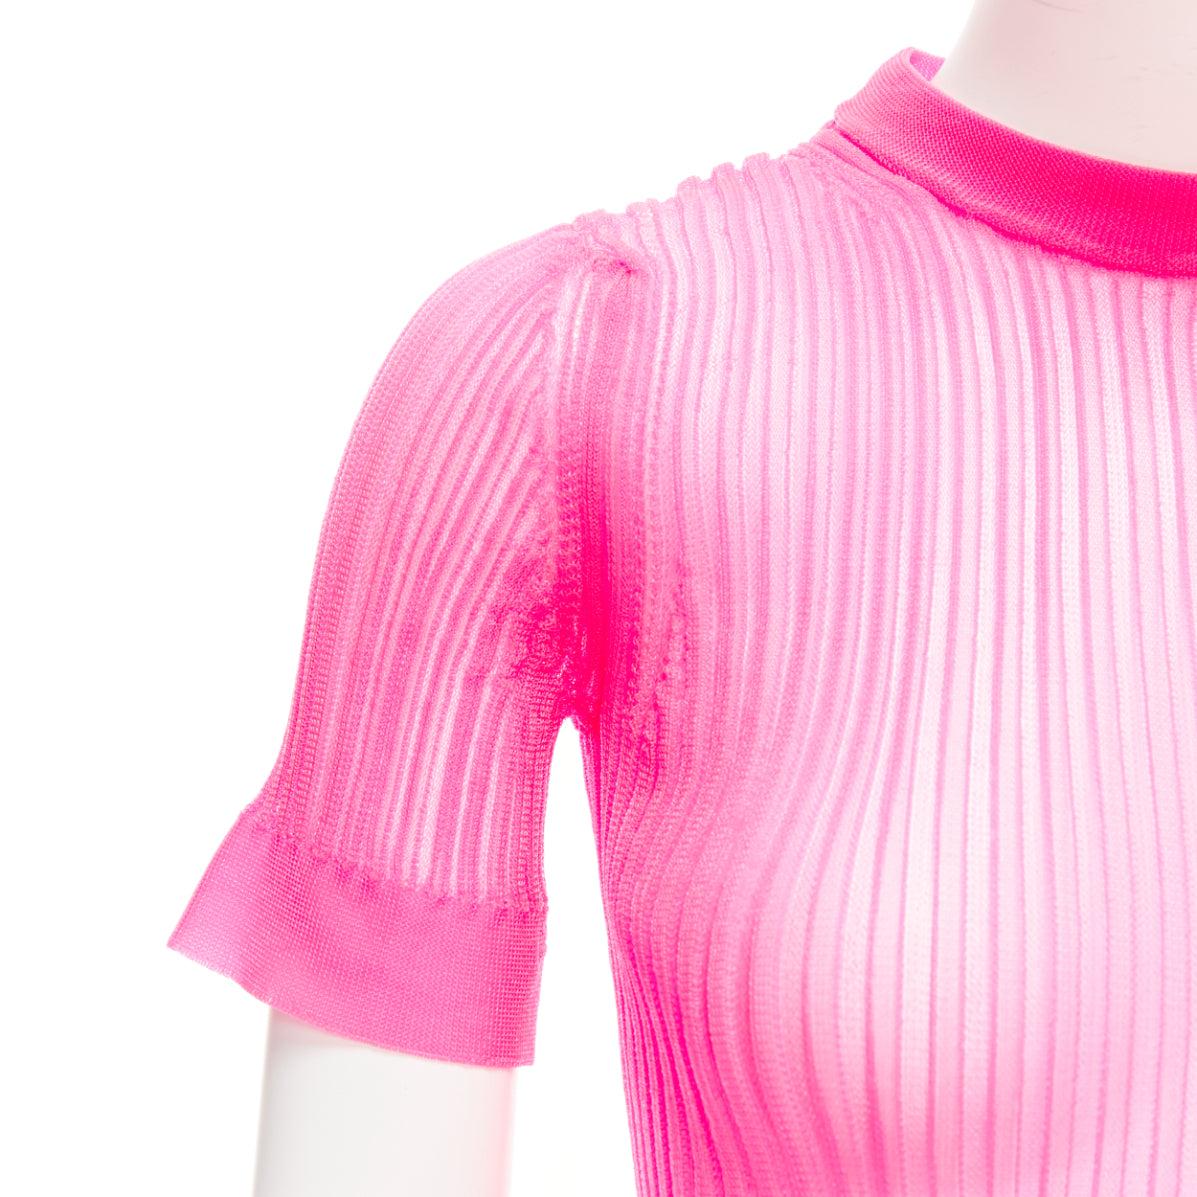 CECILIE BAHNSEN Fabienne neon pink ribber sheer crew flare sleeve top XS
Reference: LNKO/A02345
Brand: Cecilie Bahnsen
Model: Fabienne
Material: Nylon
Color: Neon Pink
Pattern: Solid
Closure: Pullover
Extra Details: Pink sheer ribbed top from